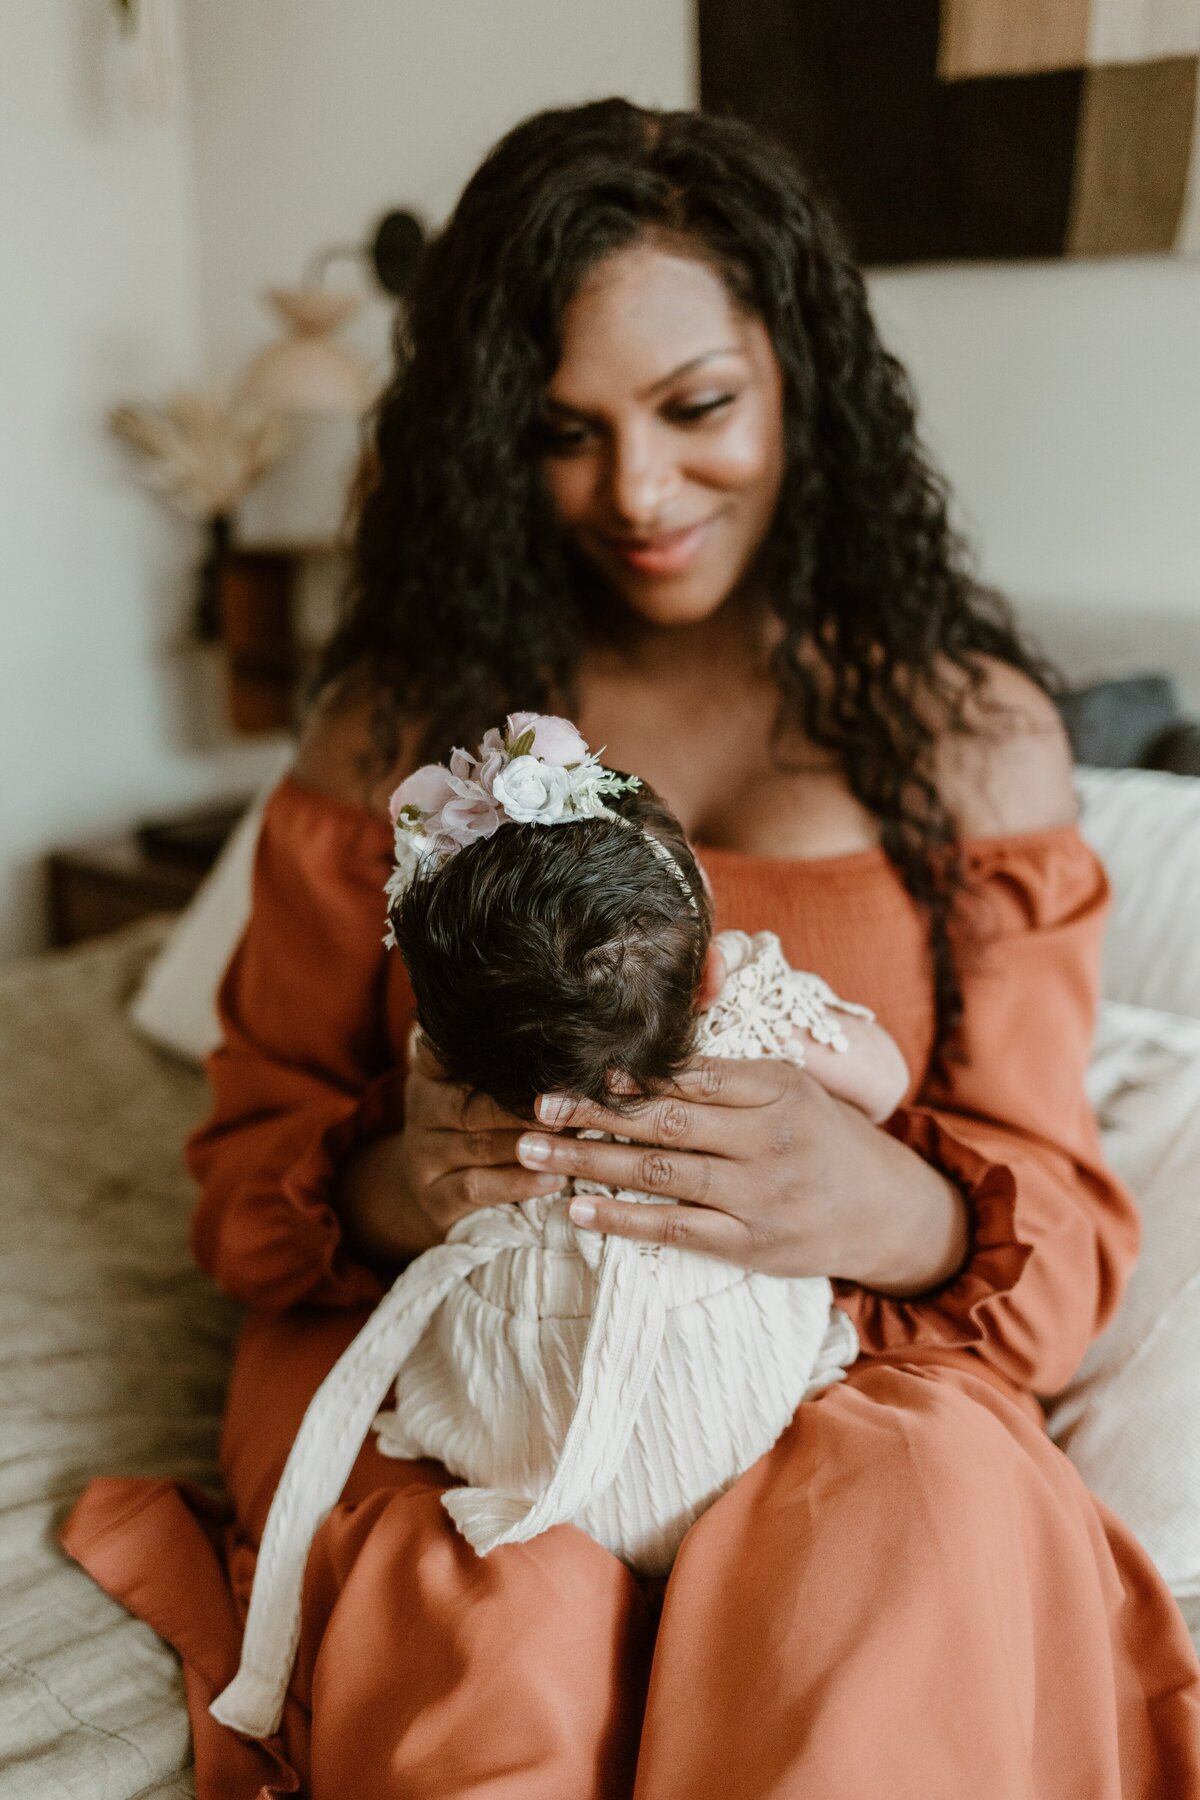 A Hudson Valley newborn photographer captures a tender moment as a mother in a burnt orange dress smiles down at her baby adorned with a flower crown, nestled comfortably in her arms.